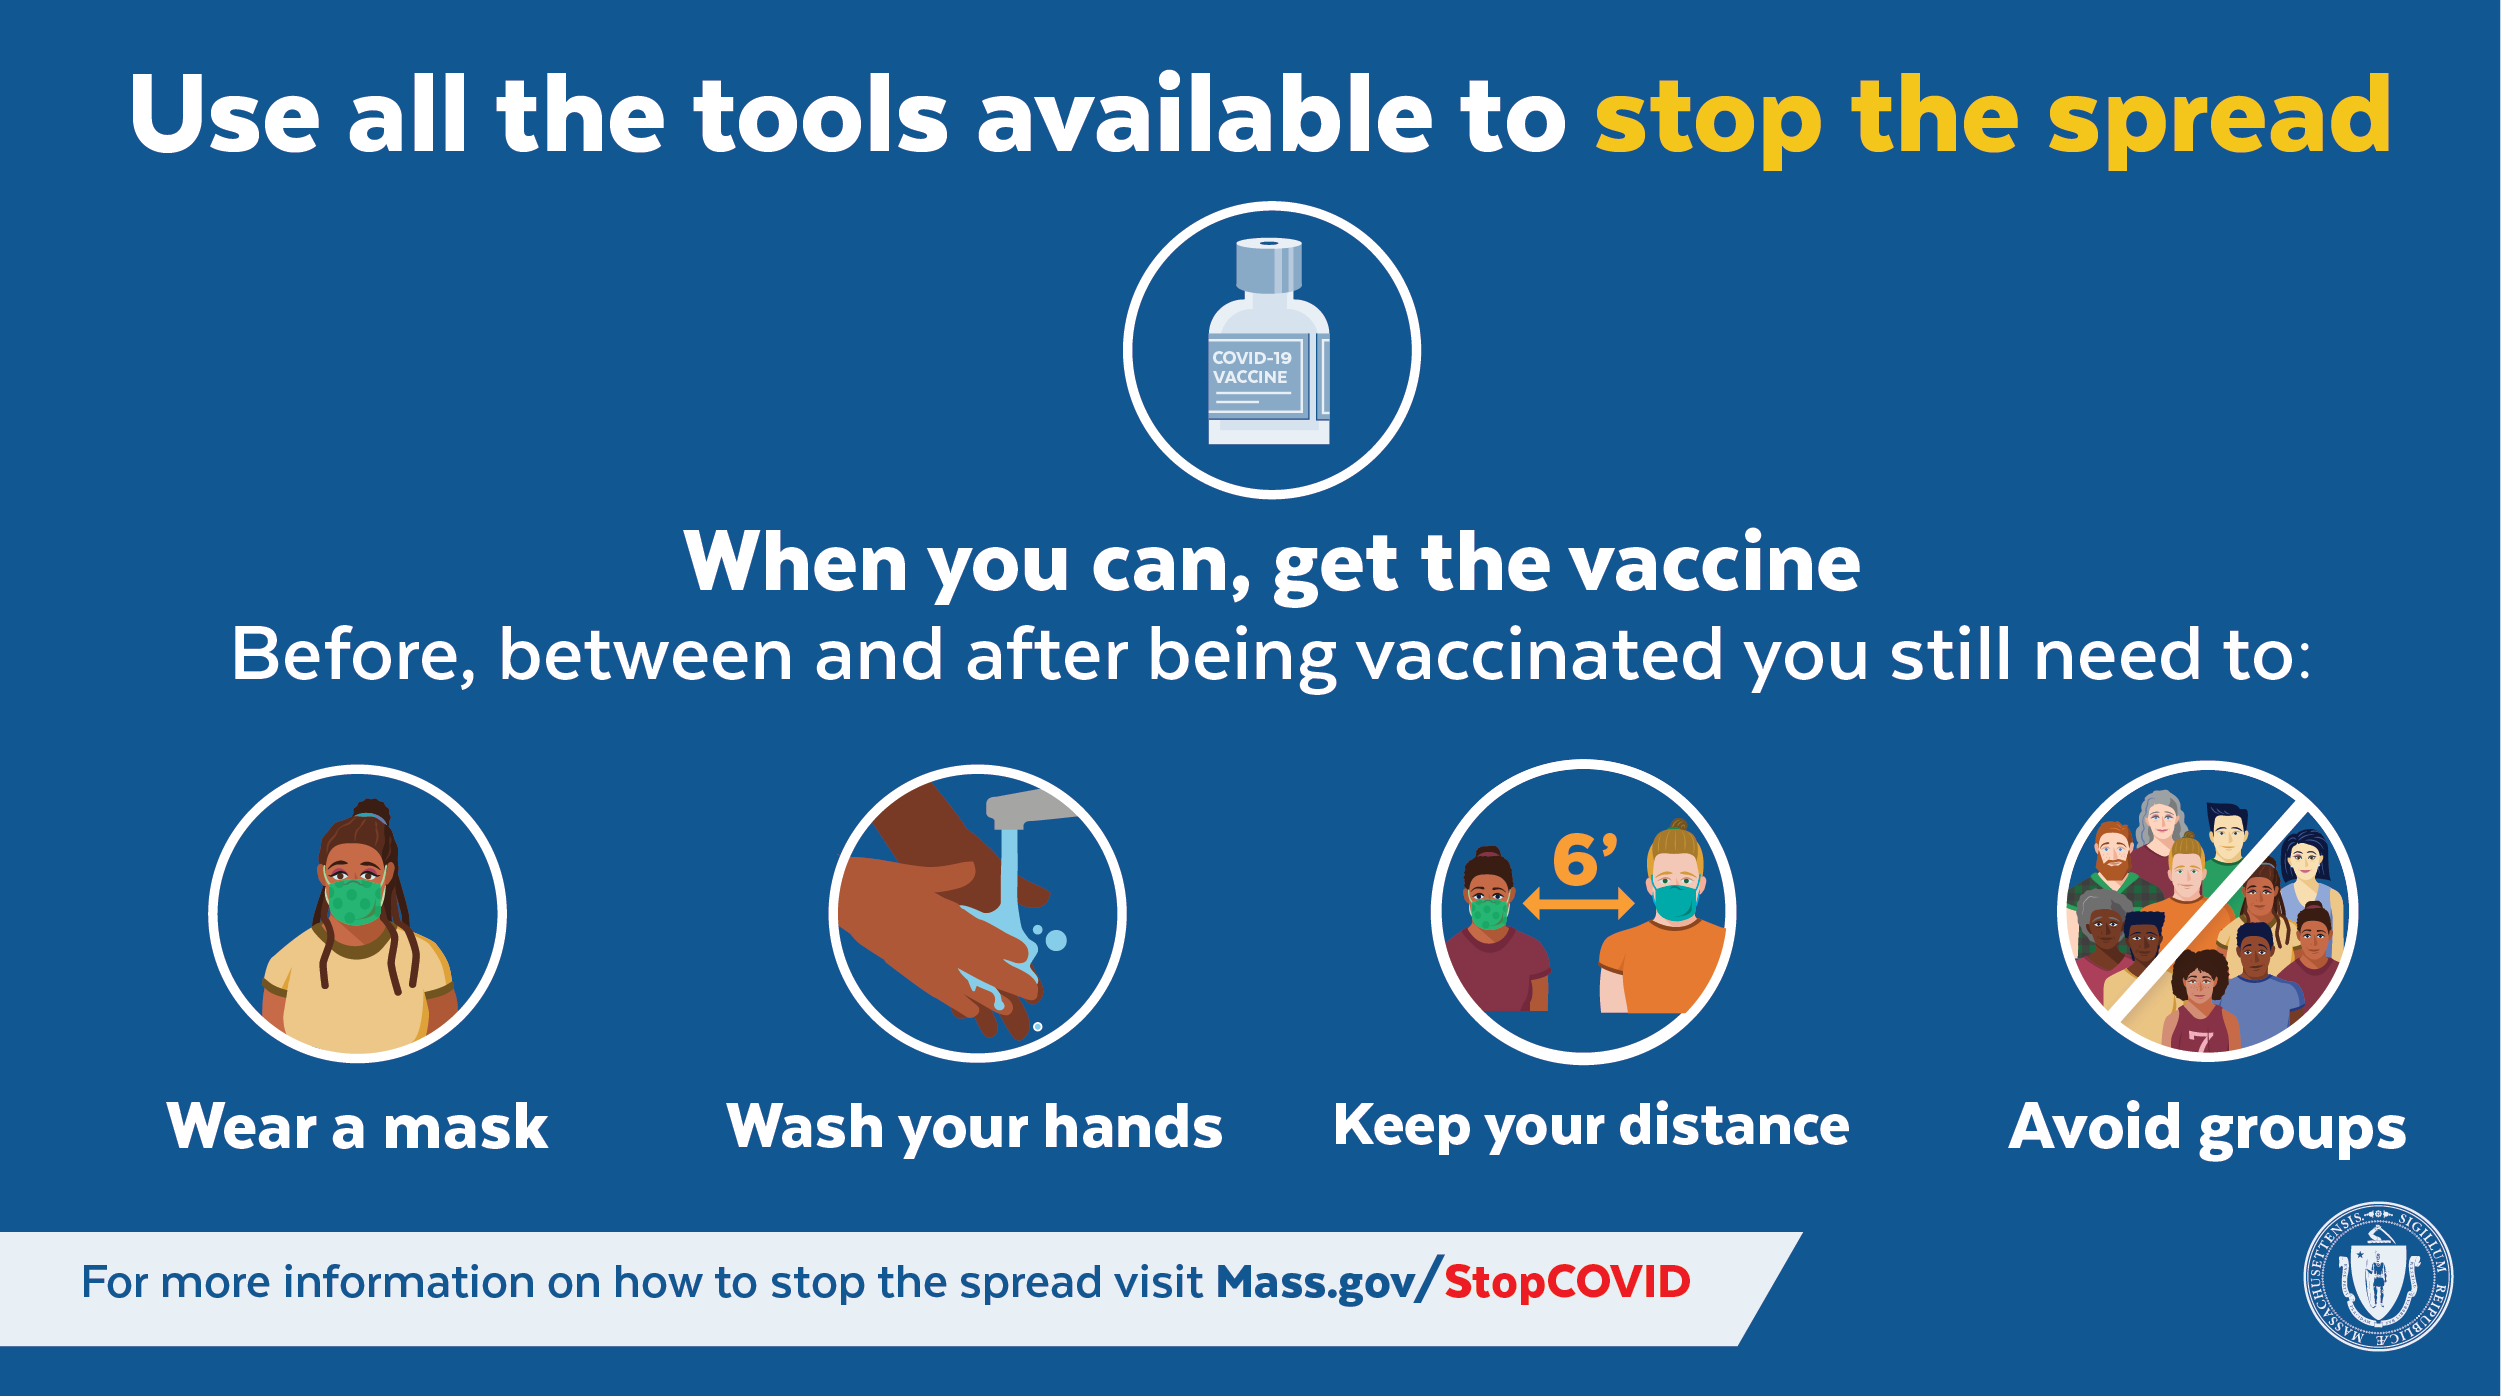 Mass.gov: "Use all of the tools available to #StoptheSpread"